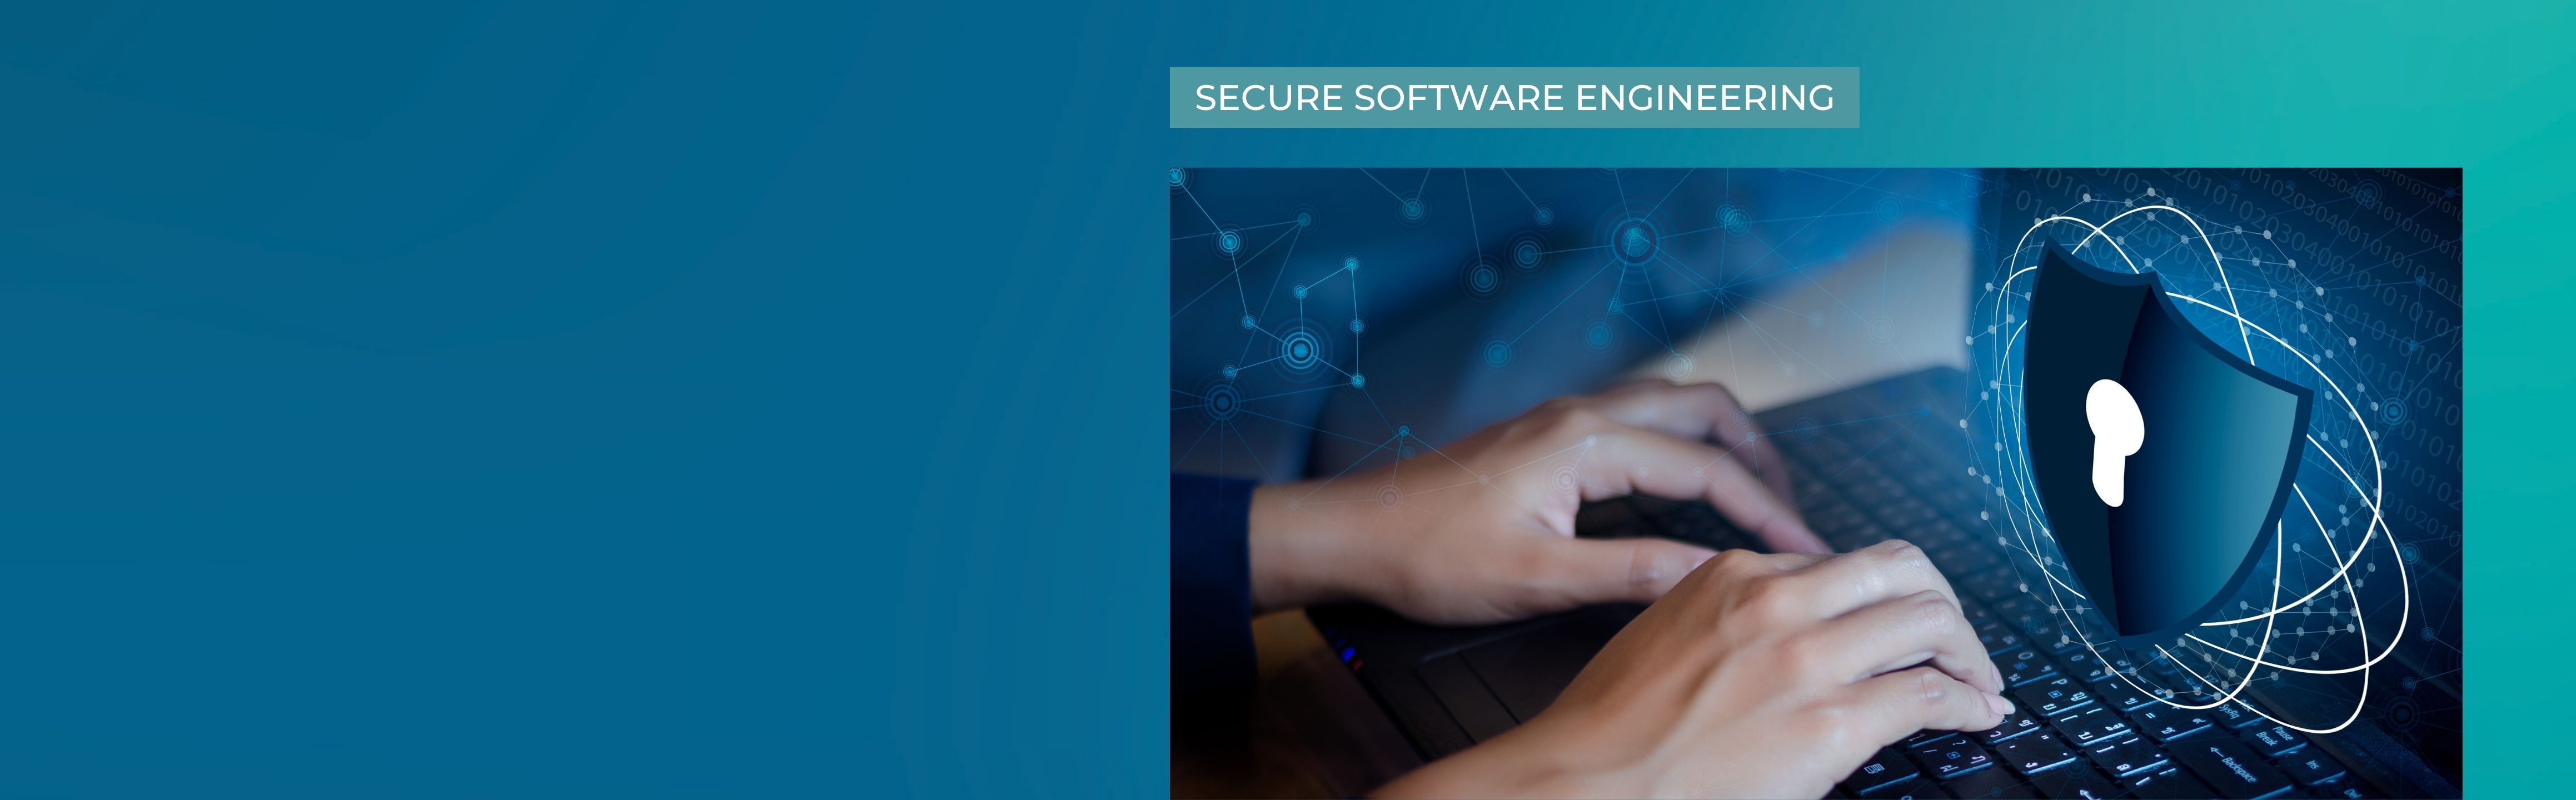 Academy Header Secure Software Engineering English